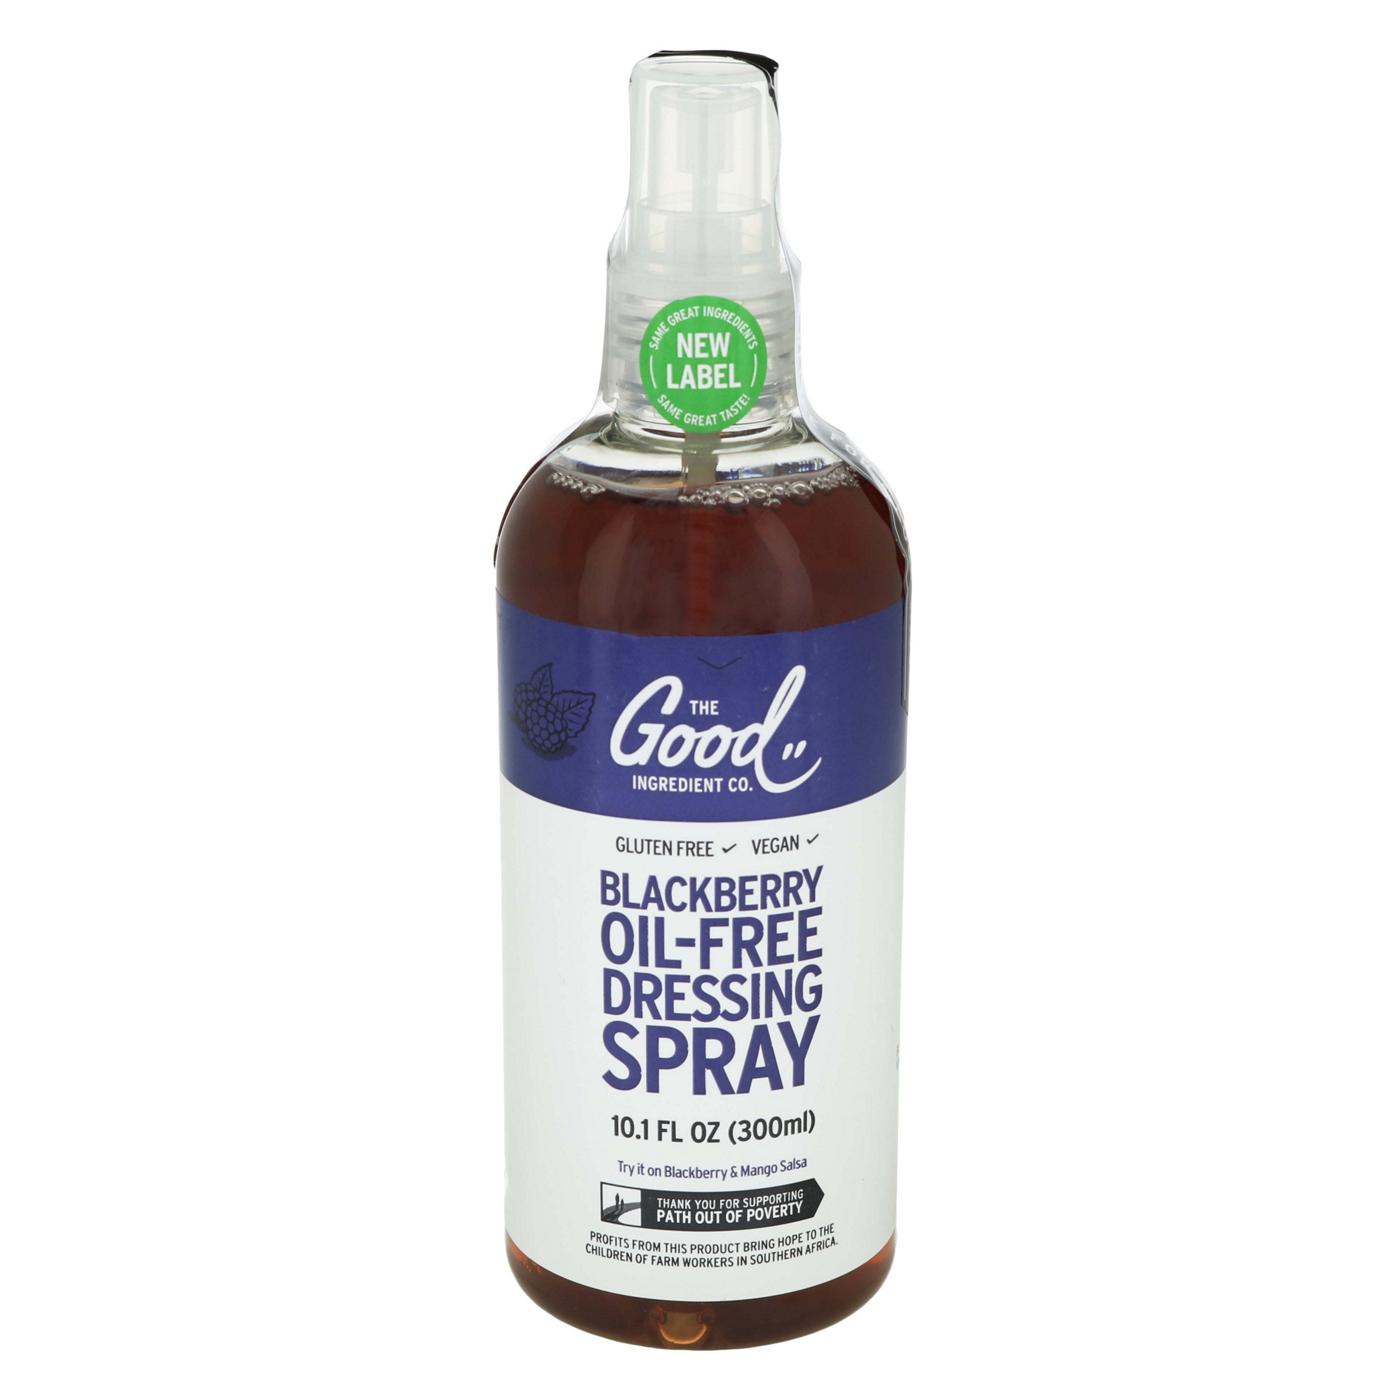 The Good Ingredient Co. Blackberry Dressing Spray; image 1 of 2